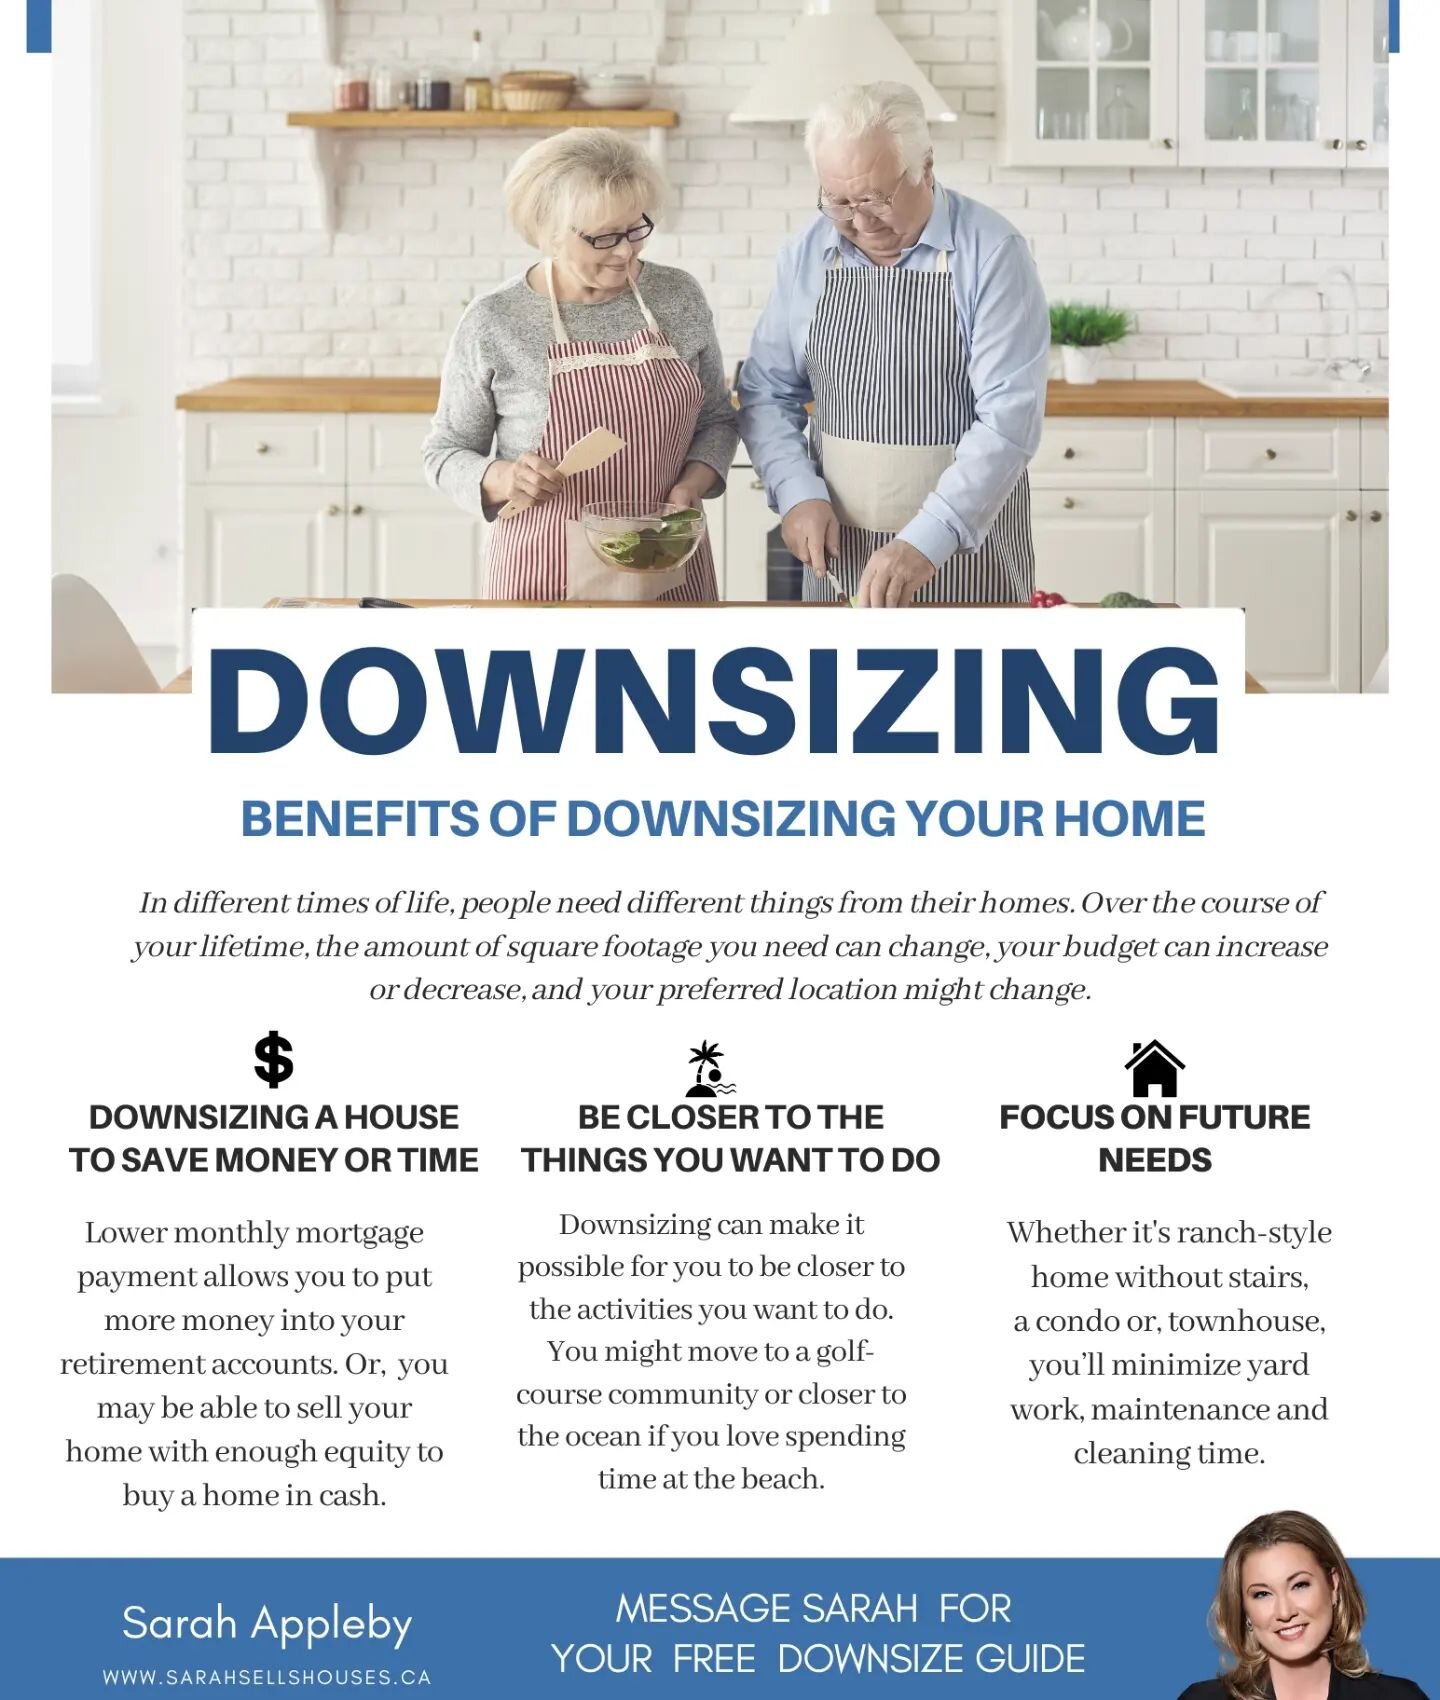 Ready to DOWNSIZE with ease? I&rsquo;m Sarah and I am here to guide you every step of the way! My downsizing services, are designed to help you with a seamless transition into your new home.&nbsp; 
Claim your FREE Downsizing Guide now by clicking &ld